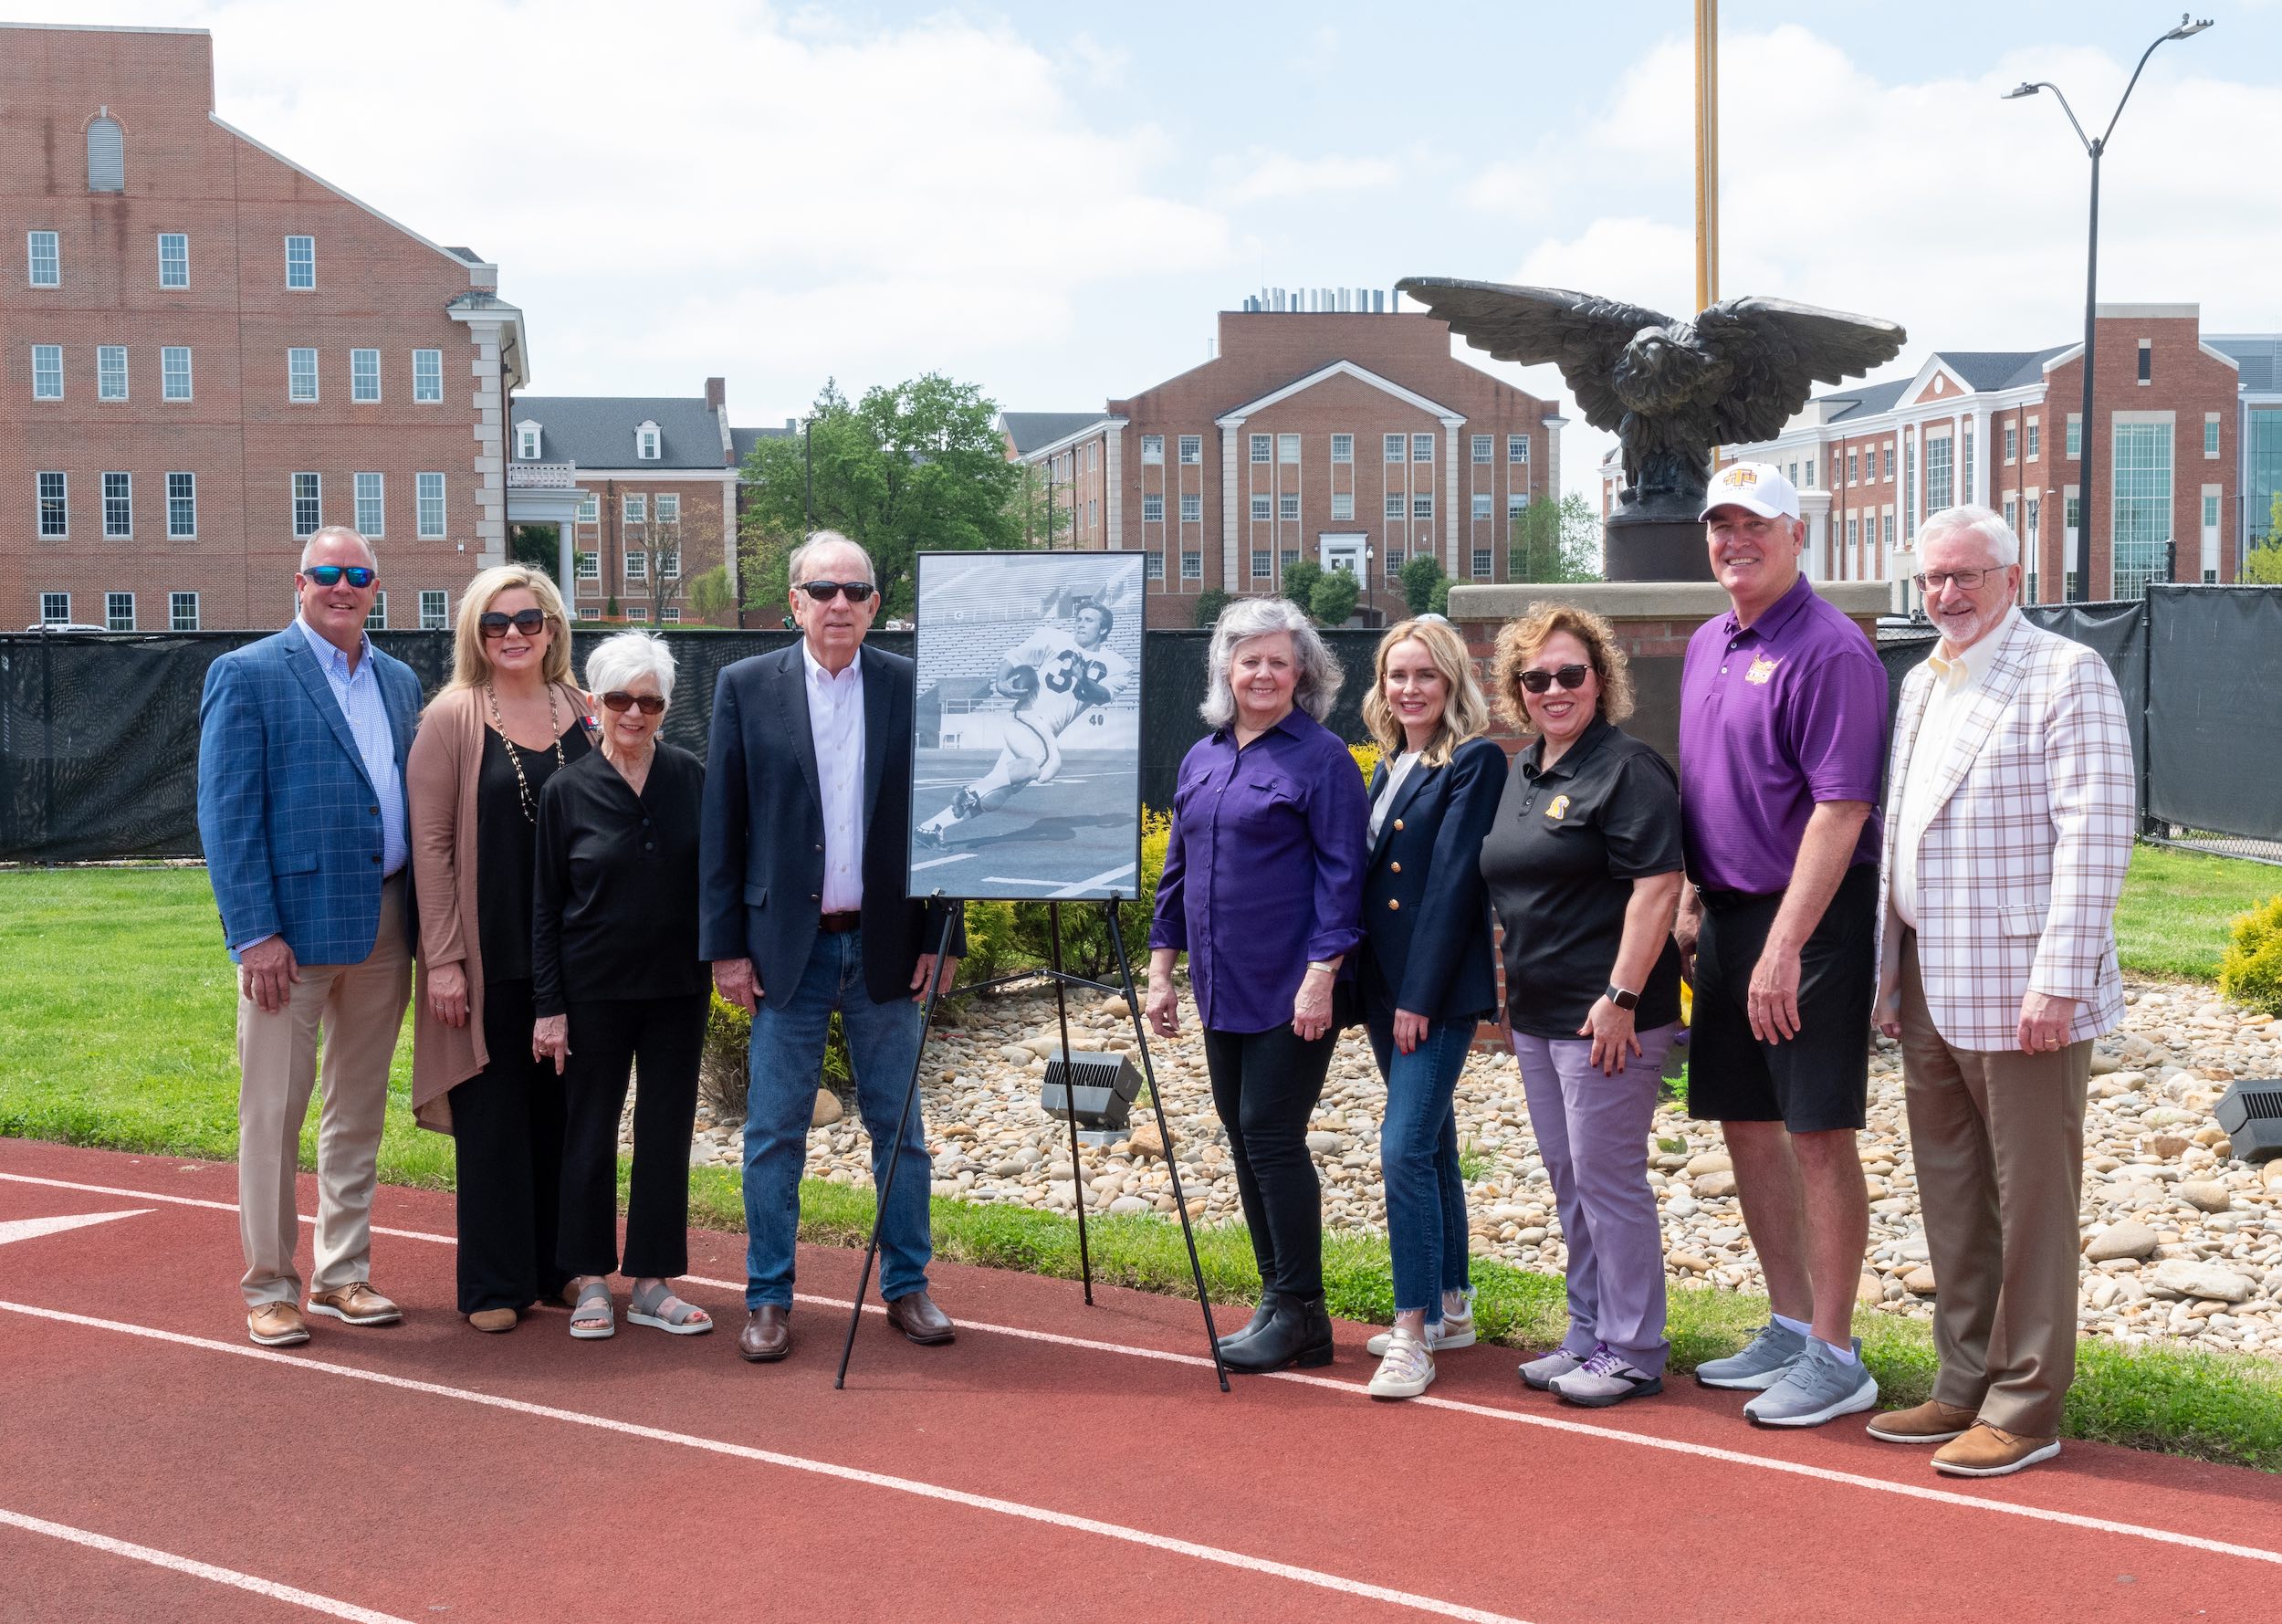 Members of the Gaw and Phillips families are pictured with Tennessee Tech leaders and a portrait of the late Ottis Phillips. From left: Tech Athletics Director Mark Wilson, Jill Gaw Betcher, Brenda Gaw, Jerry C. Gaw, Cindy Phillips, Emily Phillips Rains, Kristie Phillips, Tech Head Football Coach Bobby Wilder and Tech President Phil Oldham. 